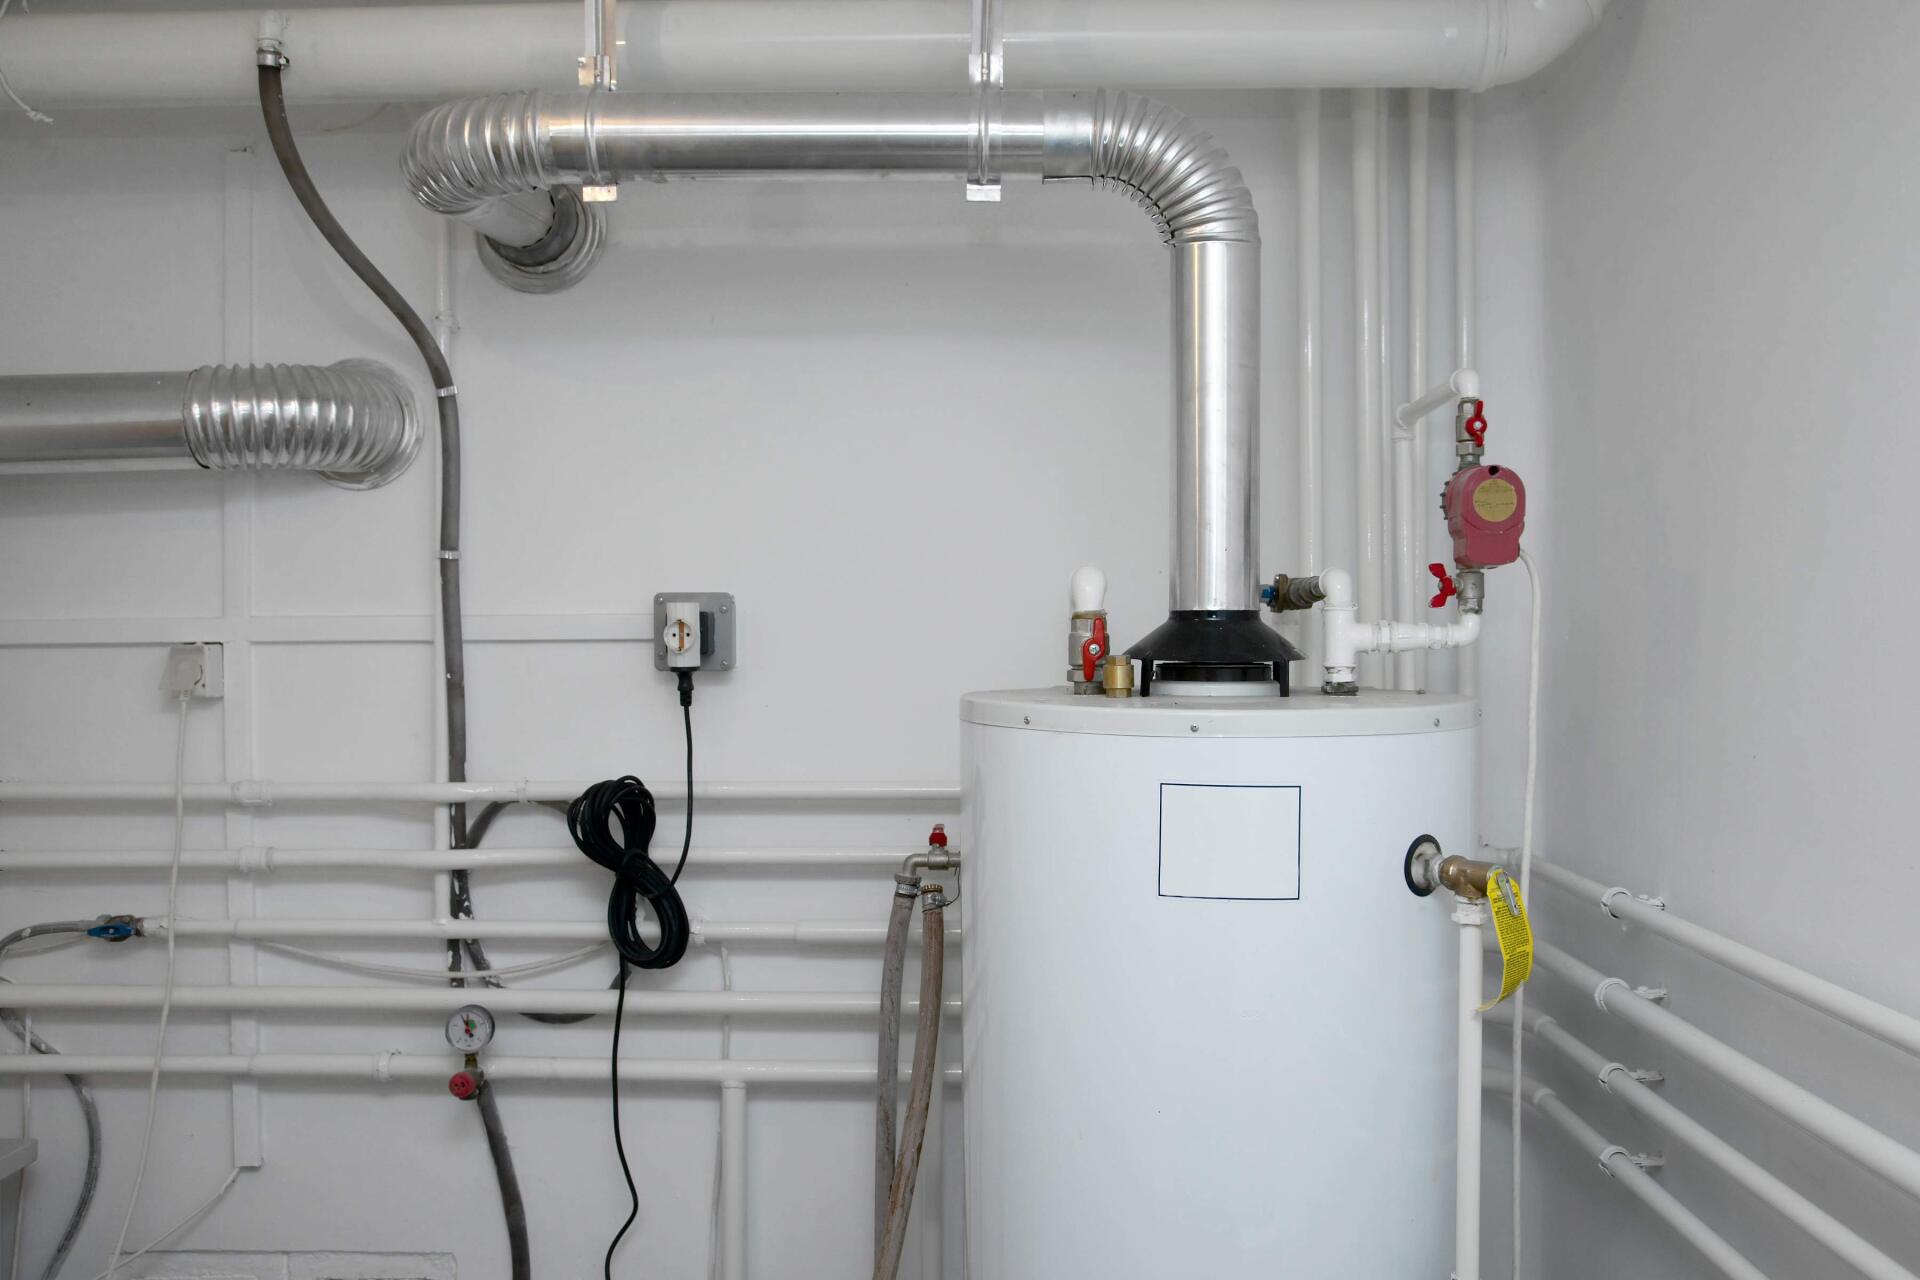 Heating pipes — Champaign, IL — Fred's Plumbing, Heating, Air Conditioning & Electric